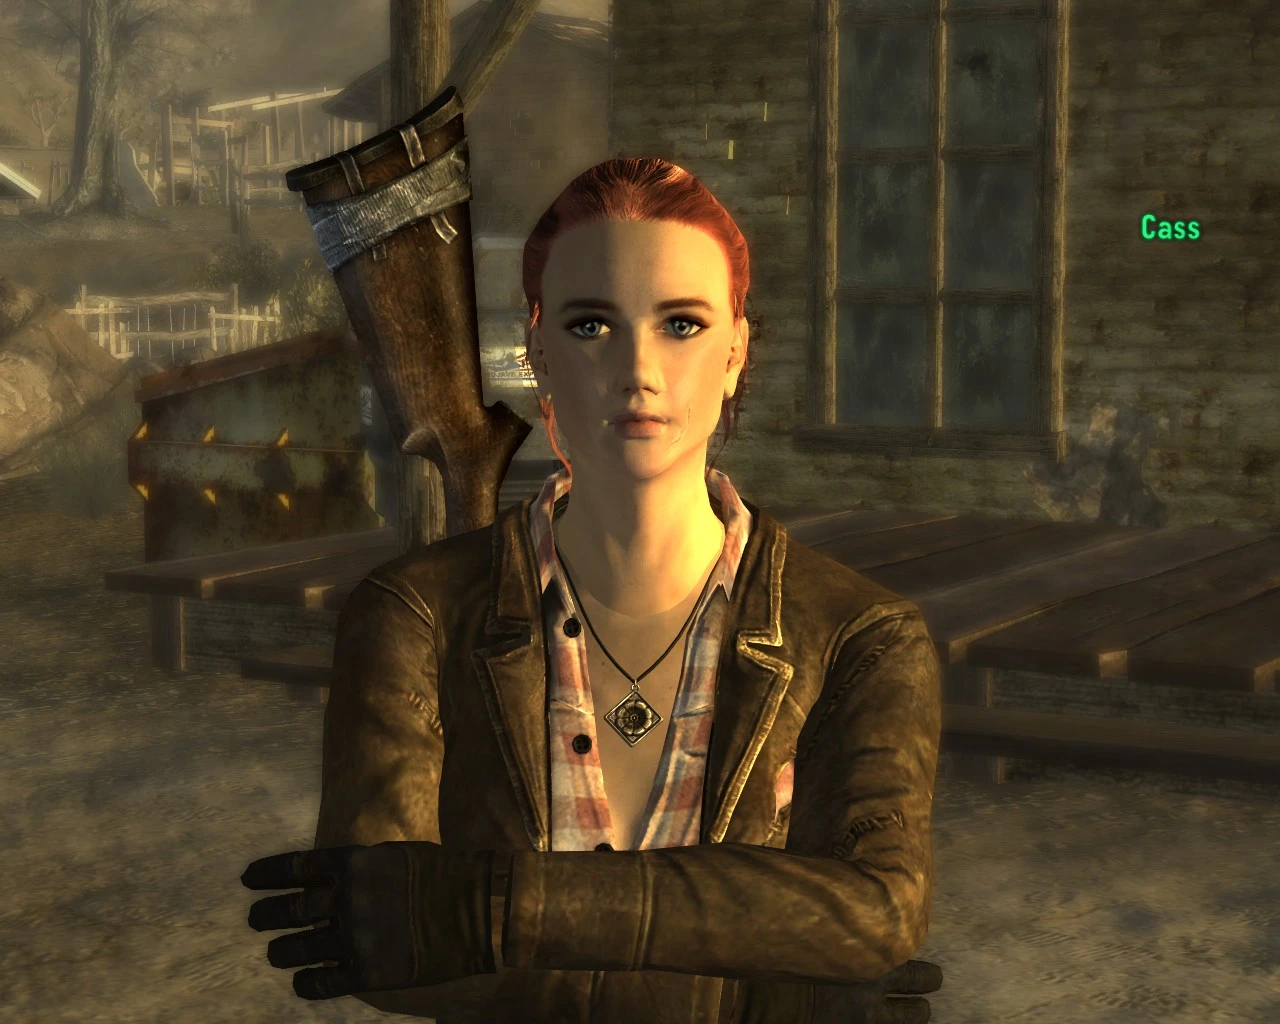 Gallery of Of Cassidy At Fallout New Vegas Mods And.